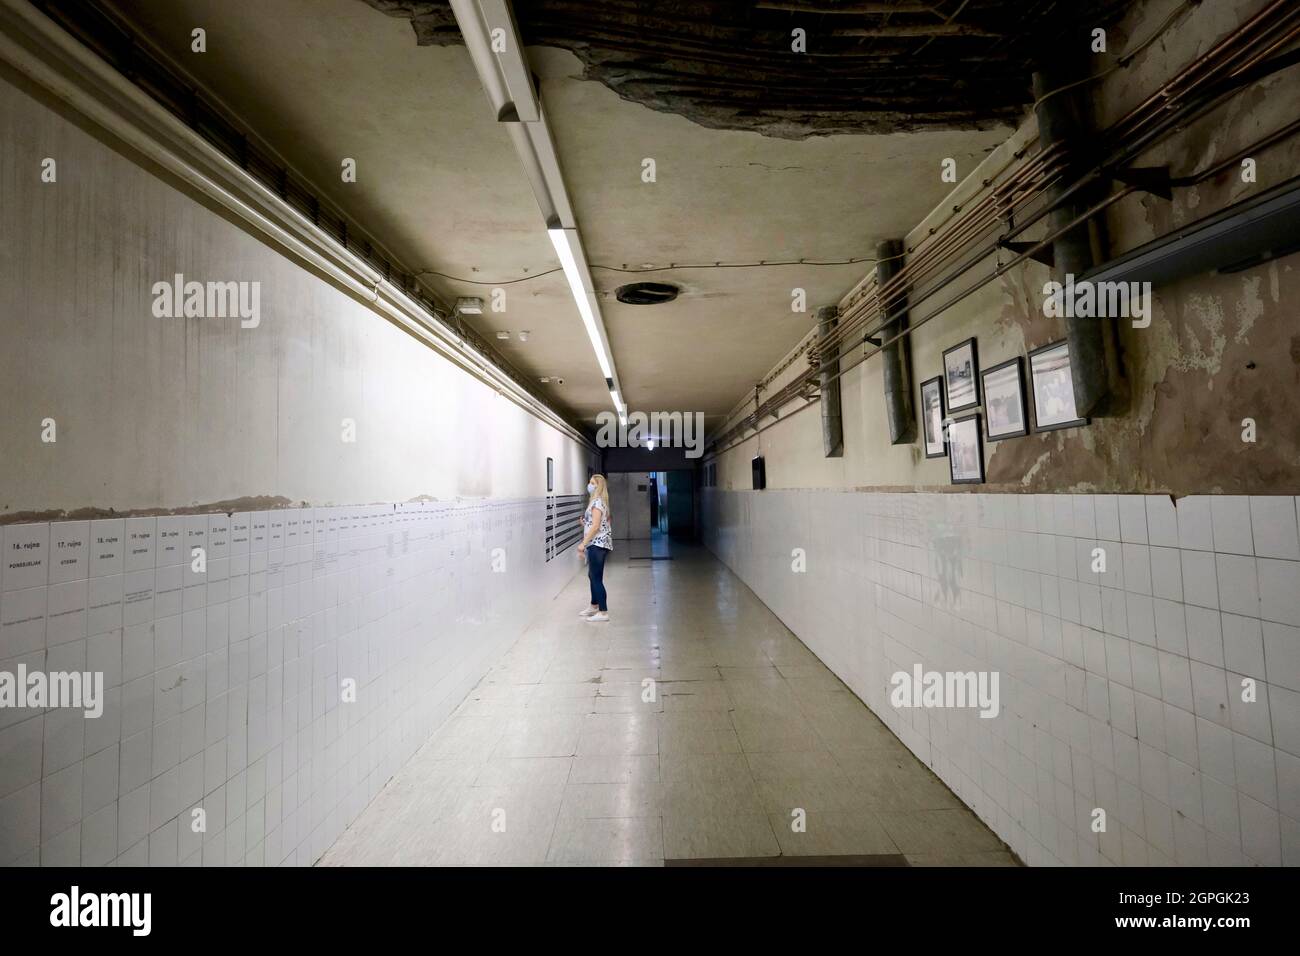 Croatia, Slavonia, Vukovar, corridor in the basement of Vukovar hospital which served as shelters for civilians and wounded, November 20, 1991, two days after the People's Army of Yugoslavia captured the town, 264 people from hospital will be taken to Ovcara to be tortured and killed Stock Photo